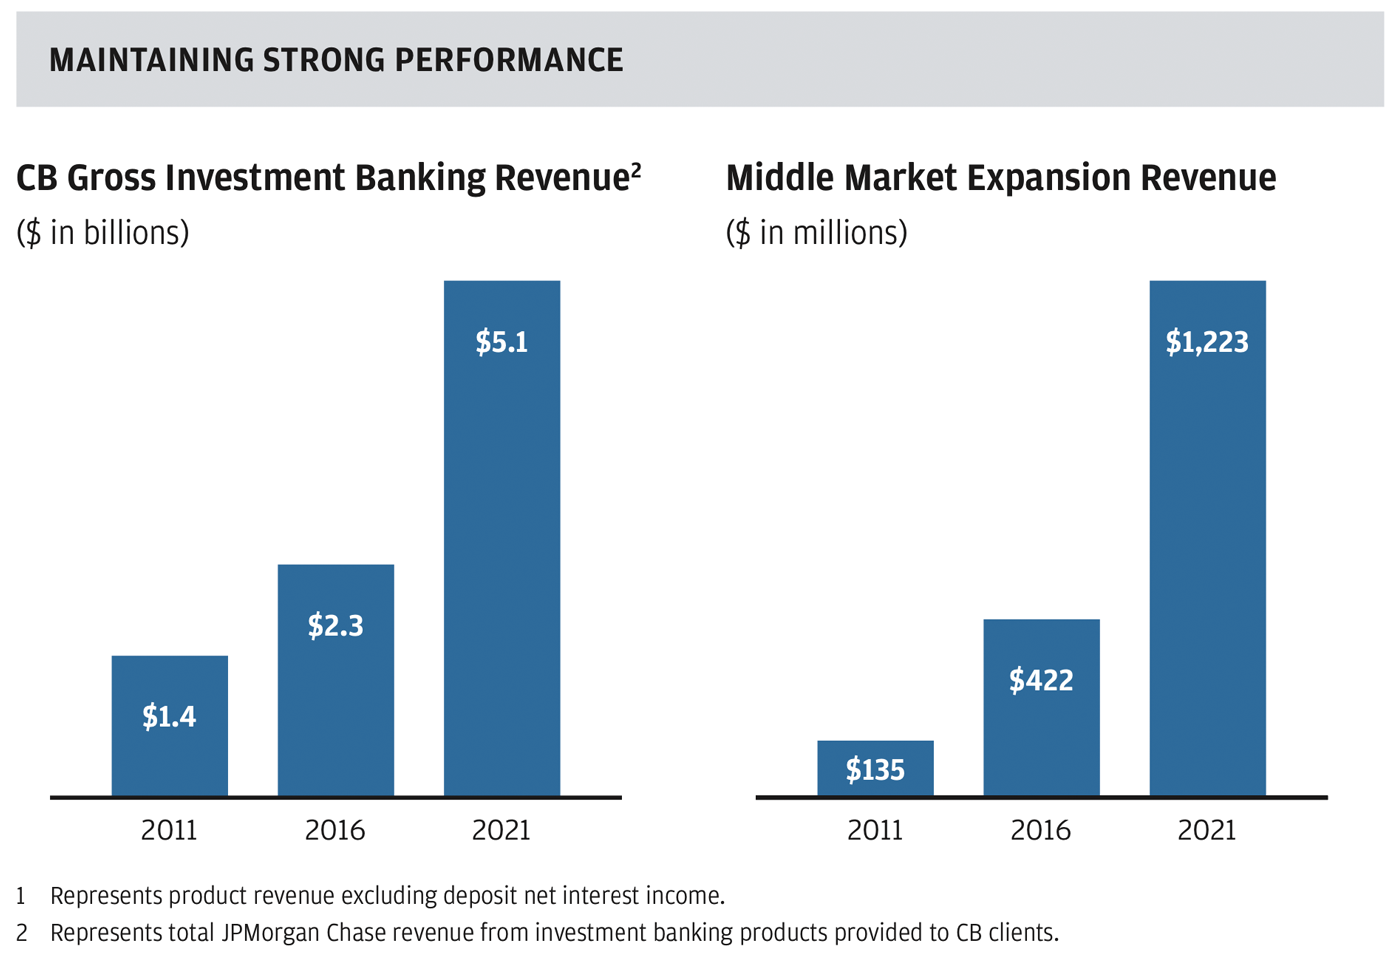 Investment Banking and expansion revenue